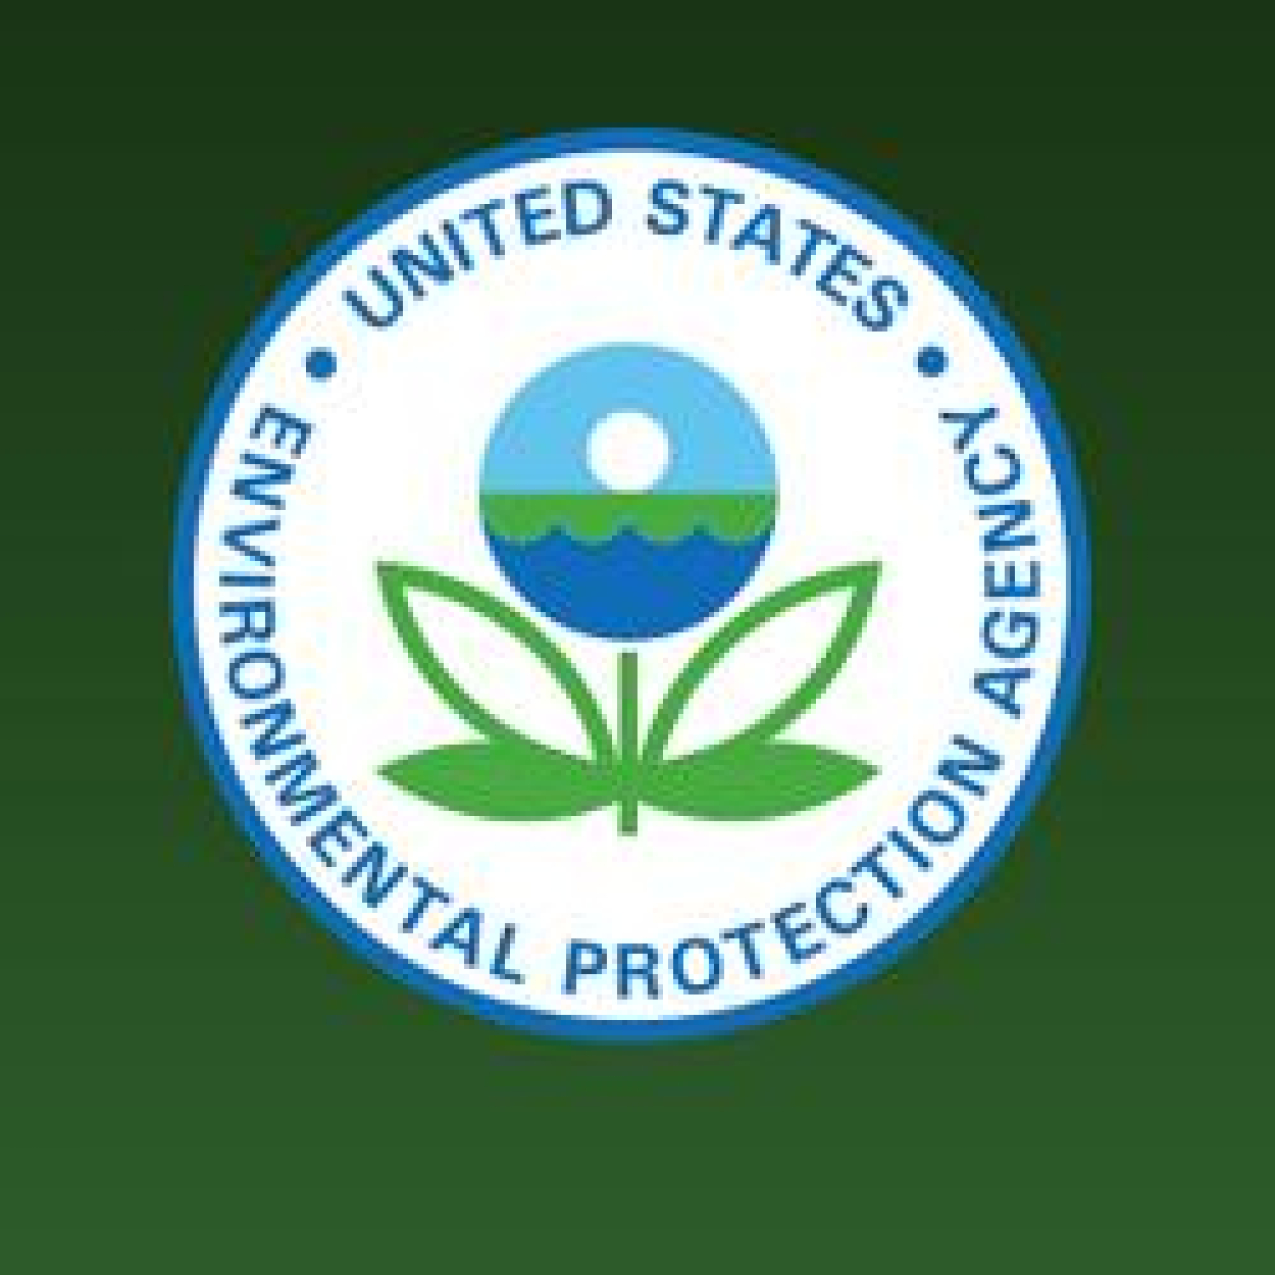 A green background with the words "U.S. Environmental Protection Agency" and the EPA logo next to the text.